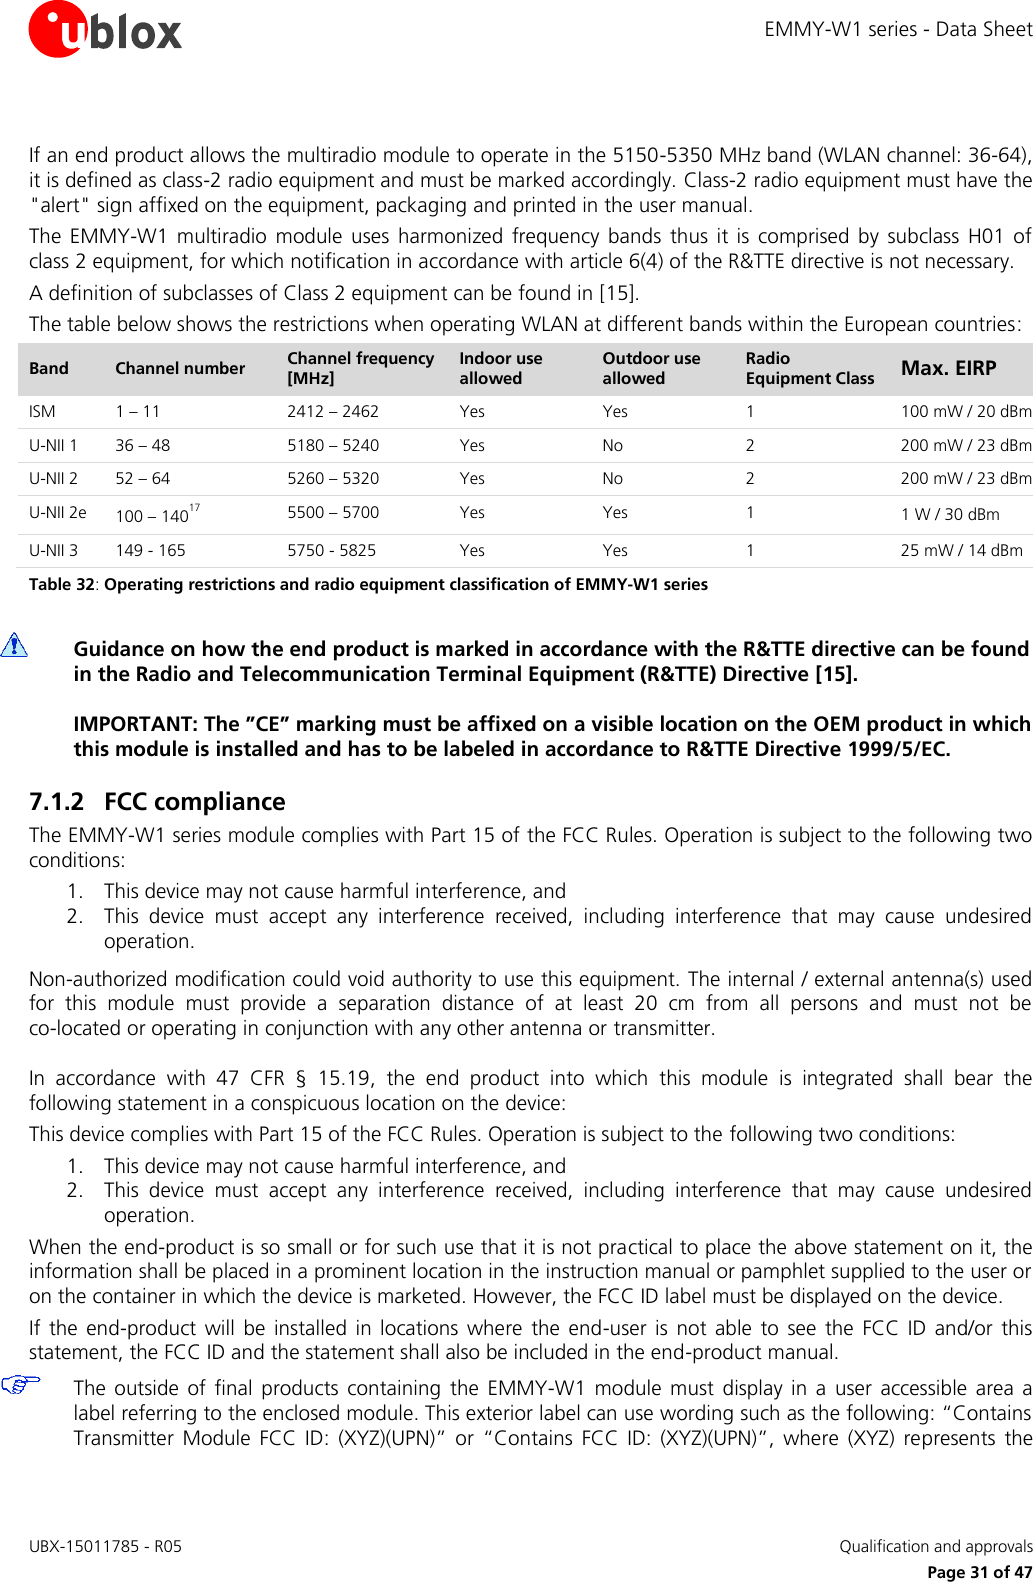 EMMY-W1 series - Data Sheet UBX-15011785 - R05   Qualification and approvals     Page 31 of 47  If an end product allows the multiradio module to operate in the 5150-5350 MHz band (WLAN channel: 36-64), it is defined as class-2 radio equipment and must be marked accordingly. Class-2 radio equipment must have the &quot;alert&quot; sign affixed on the equipment, packaging and printed in the user manual.  The  EMMY-W1  multiradio  module  uses  harmonized  frequency  bands  thus it  is  comprised  by  subclass  H01  of class 2 equipment, for which notification in accordance with article 6(4) of the R&amp;TTE directive is not necessary. A definition of subclasses of Class 2 equipment can be found in [15].  The table below shows the restrictions when operating WLAN at different bands within the European countries: Band Channel number Channel frequency [MHz] Indoor use allowed Outdoor use allowed Radio Equipment Class Max. EIRP ISM 1 – 11  2412 – 2462  Yes Yes 1 100 mW / 20 dBm U-NII 1 36 – 48  5180 – 5240  Yes No 2 200 mW / 23 dBm U-NII 2 52 – 64  5260 – 5320  Yes No 2 200 mW / 23 dBm U-NII 2e 100 – 14017 5500 – 5700  Yes Yes 1 1 W / 30 dBm U-NII 3 149 - 165 5750 - 5825 Yes Yes 1 25 mW / 14 dBm Table 32: Operating restrictions and radio equipment classification of EMMY-W1 series   Guidance on how the end product is marked in accordance with the R&amp;TTE directive can be found in the Radio and Telecommunication Terminal Equipment (R&amp;TTE) Directive [15].   IMPORTANT: The ”CE” marking must be affixed on a visible location on the OEM product in which this module is installed and has to be labeled in accordance to R&amp;TTE Directive 1999/5/EC. 7.1.2 FCC compliance  The EMMY-W1 series module complies with Part 15 of the FCC Rules. Operation is subject to the following two conditions: 1. This device may not cause harmful interference, and 2. This  device  must  accept  any  interference  received,  including  interference  that  may  cause  undesired operation. Non-authorized modification could void authority to use this equipment. The internal / external antenna(s) used for  this  module  must  provide  a  separation  distance  of  at  least  20  cm  from  all  persons  and  must  not  be  co-located or operating in conjunction with any other antenna or transmitter. In  accordance  with  47  CFR  §  15.19,  the  end  product  into  which  this  module  is  integrated  shall  bear  the following statement in a conspicuous location on the device: This device complies with Part 15 of the FCC Rules. Operation is subject to the following two conditions: 1. This device may not cause harmful interference, and 2. This  device  must  accept  any  interference  received,  including  interference  that  may  cause  undesired operation. When the end-product is so small or for such use that it is not practical to place the above statement on it, the information shall be placed in a prominent location in the instruction manual or pamphlet supplied to the user or on the container in which the device is marketed. However, the FCC ID label must be displayed on the device. If the  end-product  will  be  installed  in  locations  where  the end-user  is  not  able  to  see  the  FCC ID  and/or  this statement, the FCC ID and the statement shall also be included in the end-product manual.  The  outside  of  final  products  containing  the  EMMY-W1  module  must  display  in  a  user  accessible  area a label referring to the enclosed module. This exterior label can use wording such as the following: “Contains Transmitter  Module  FCC  ID:  (XYZ)(UPN)”  or  “Contains  FCC  ID:  (XYZ)(UPN)”,  where  (XYZ)  represents  the 